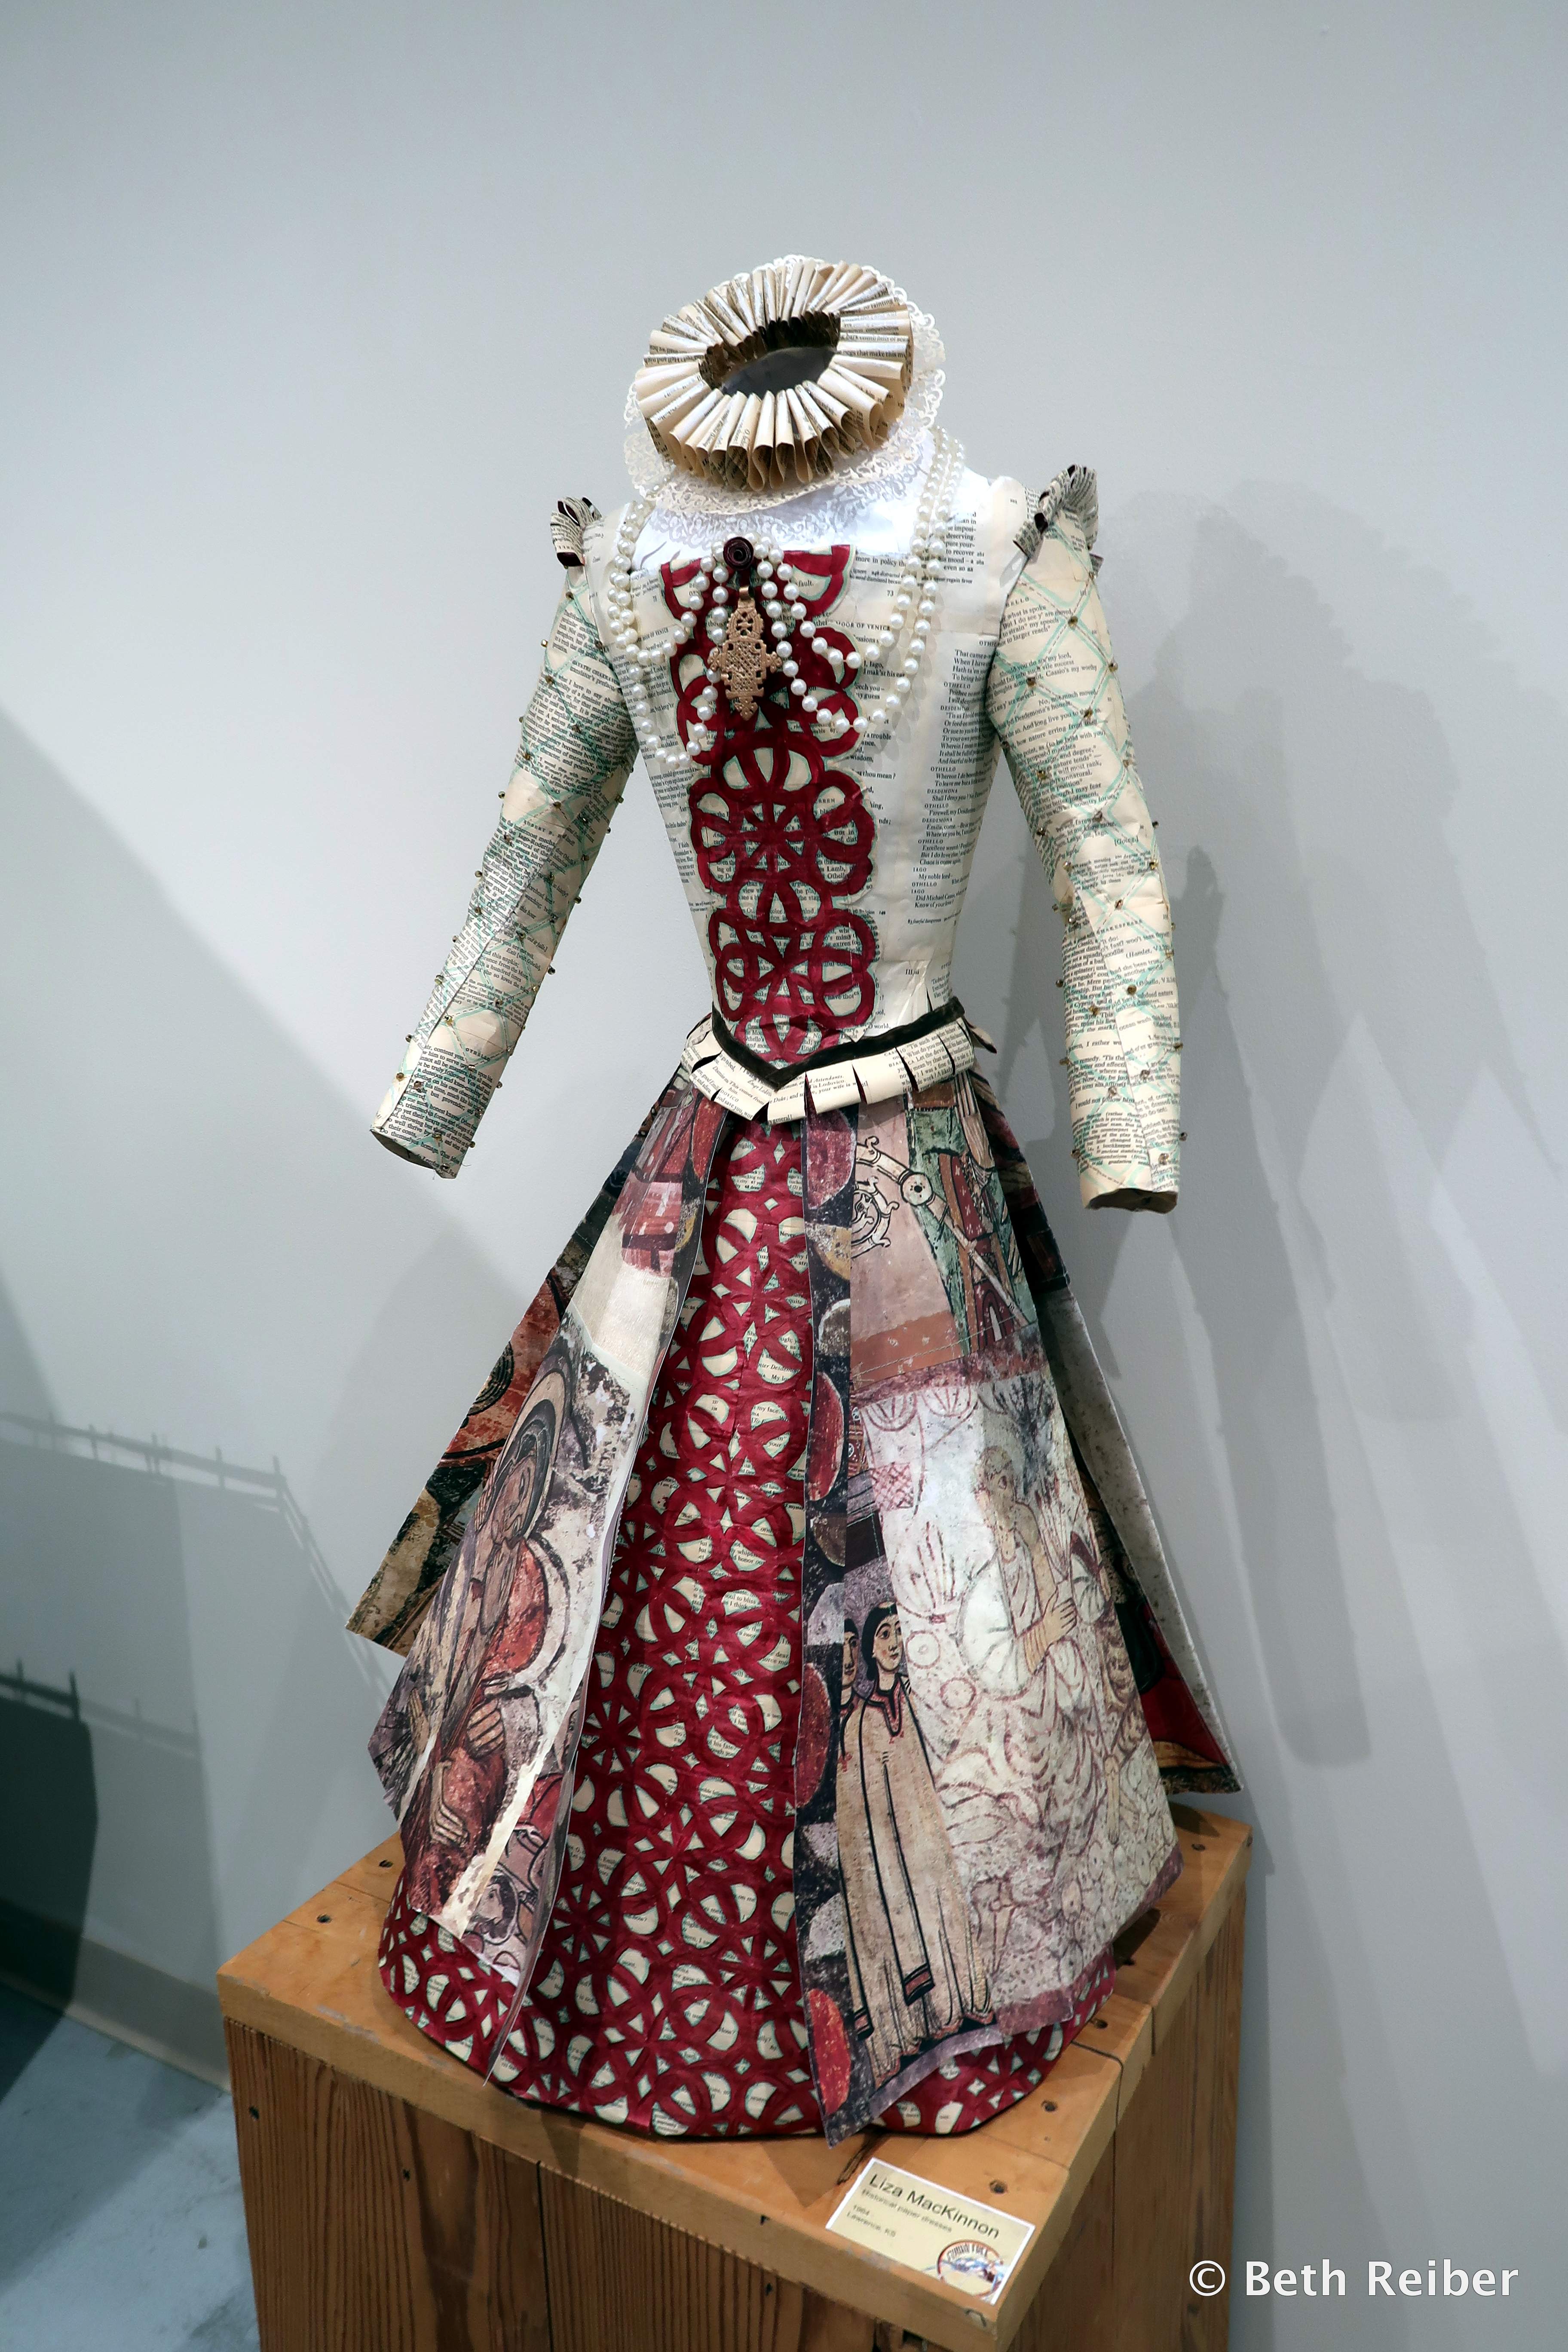 Artist Liza MacKinnon uses pages of books, maps, photographs, currency and other forms of paper to produce historically correct dresses like this one, on display at the Grassroots Art Center in Lucas